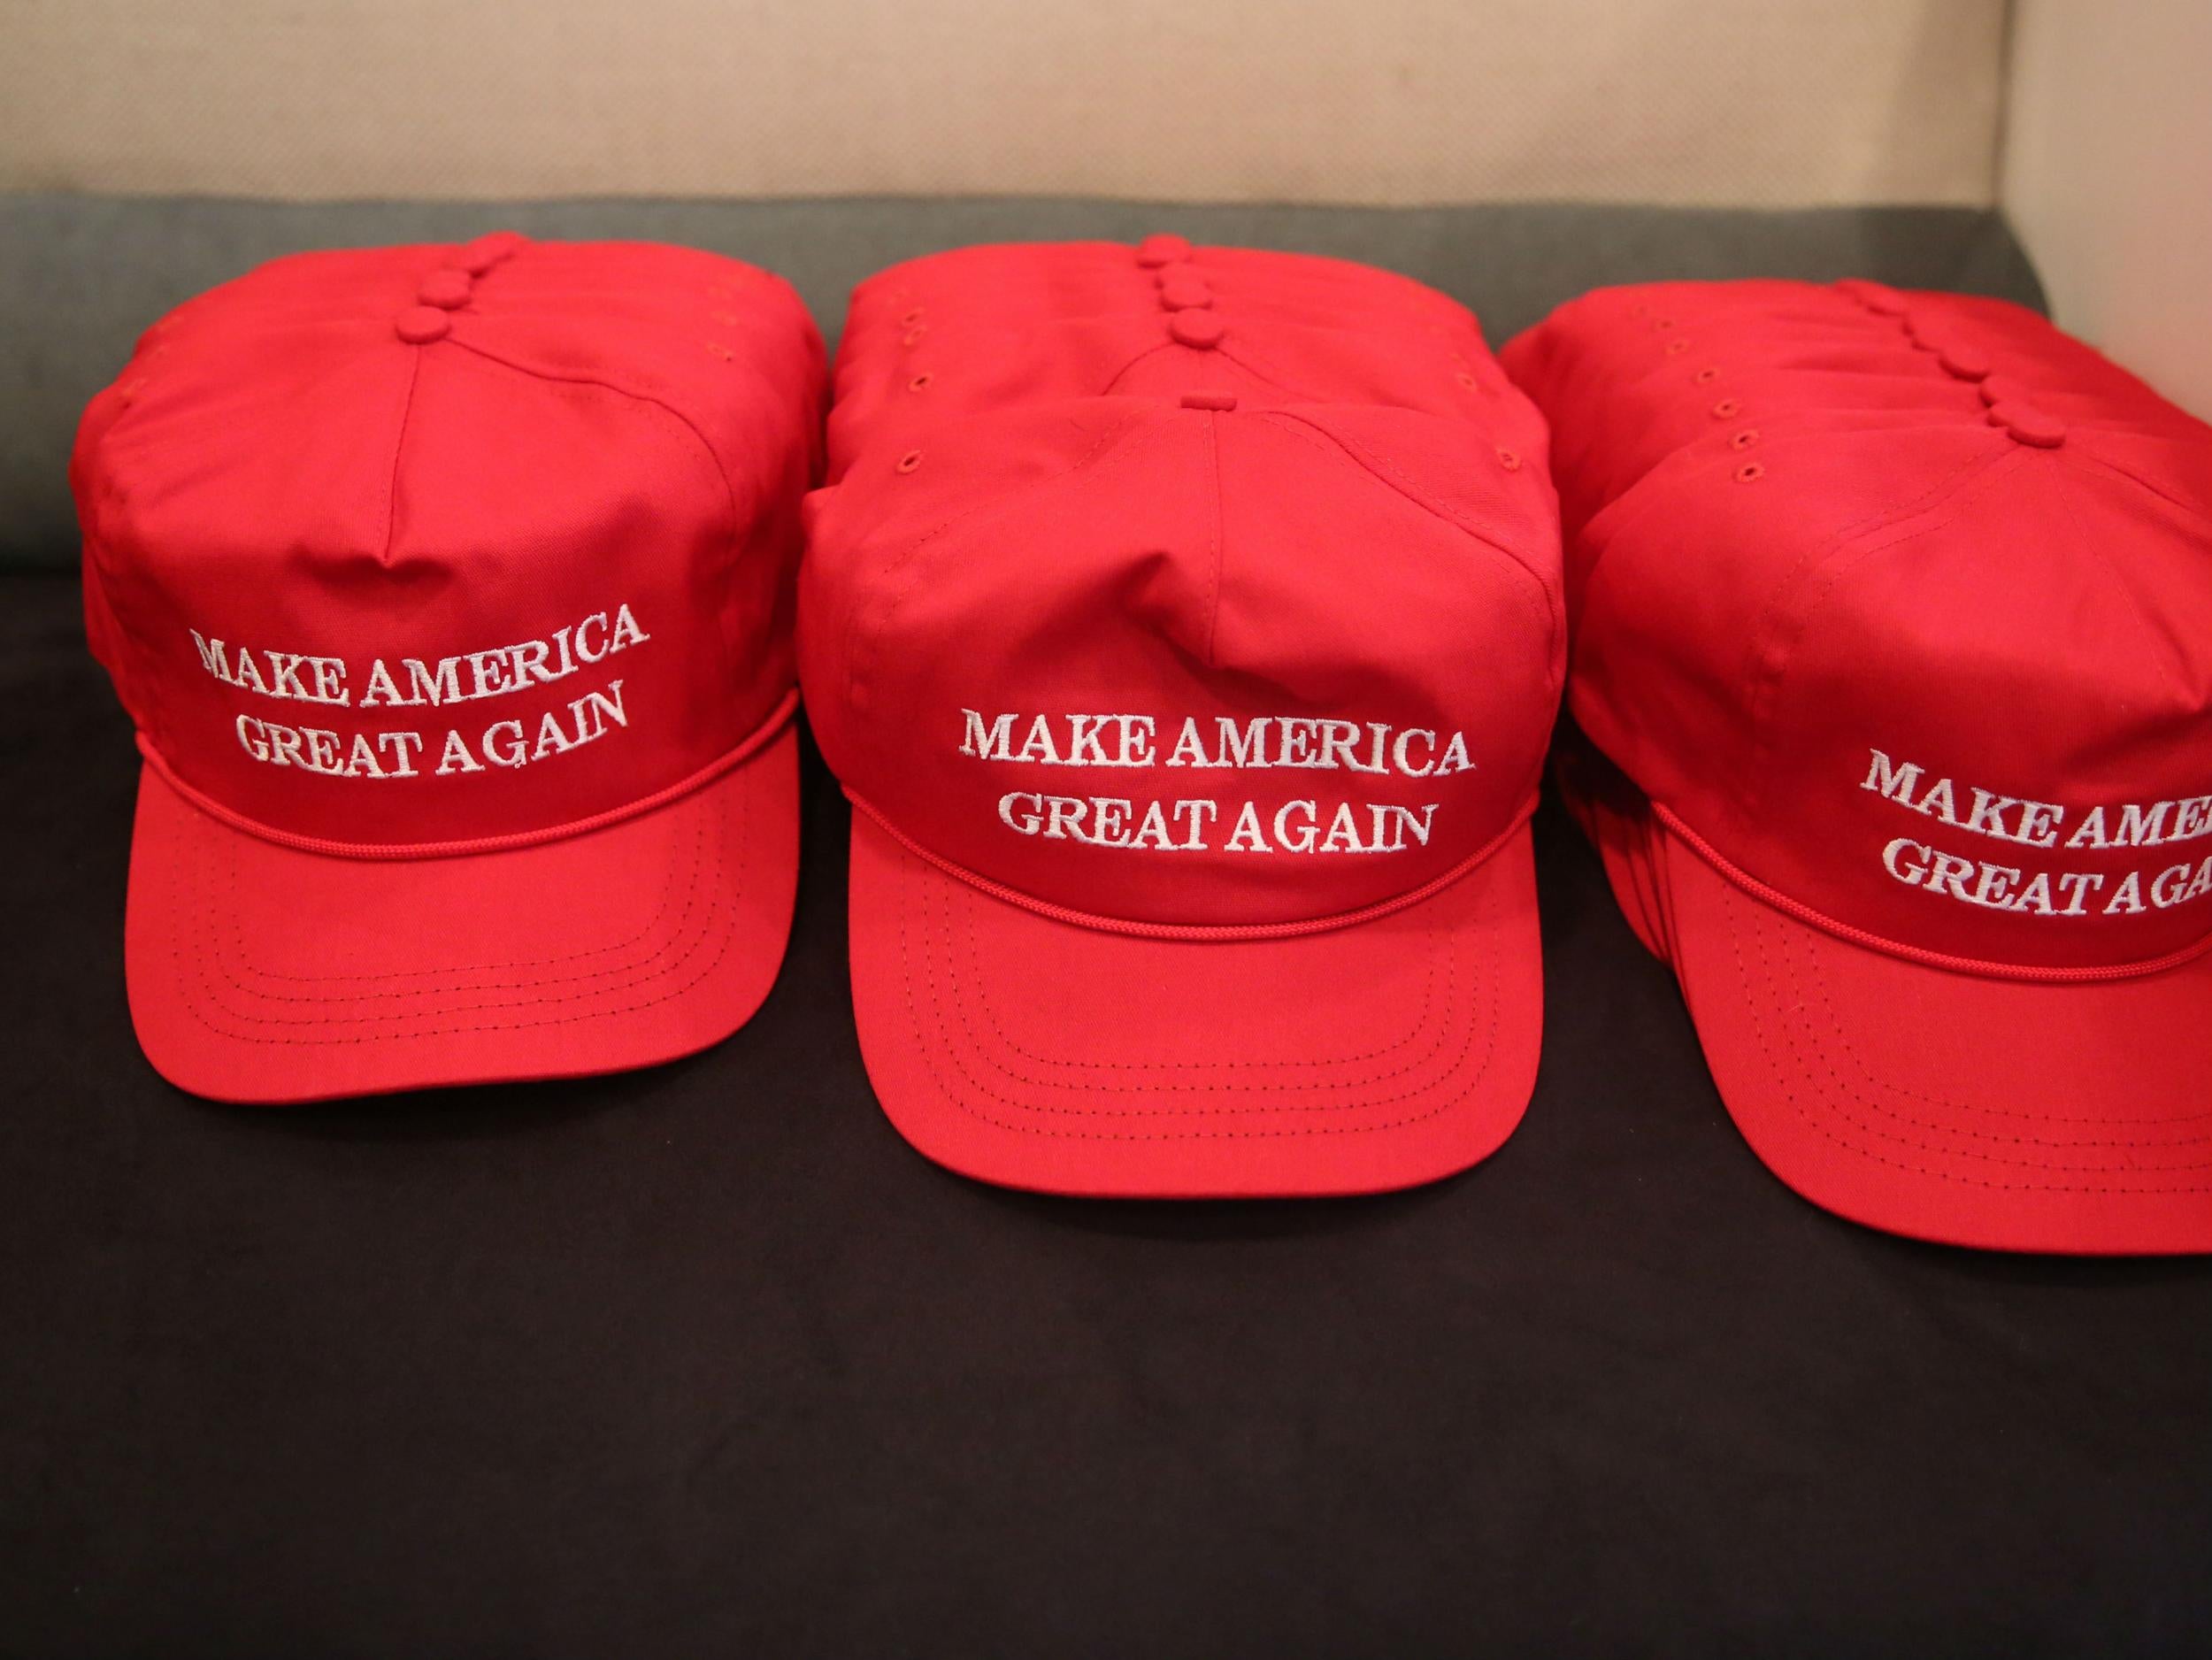 Wearing one of these hats can be a spiritual matter, according to a court filing